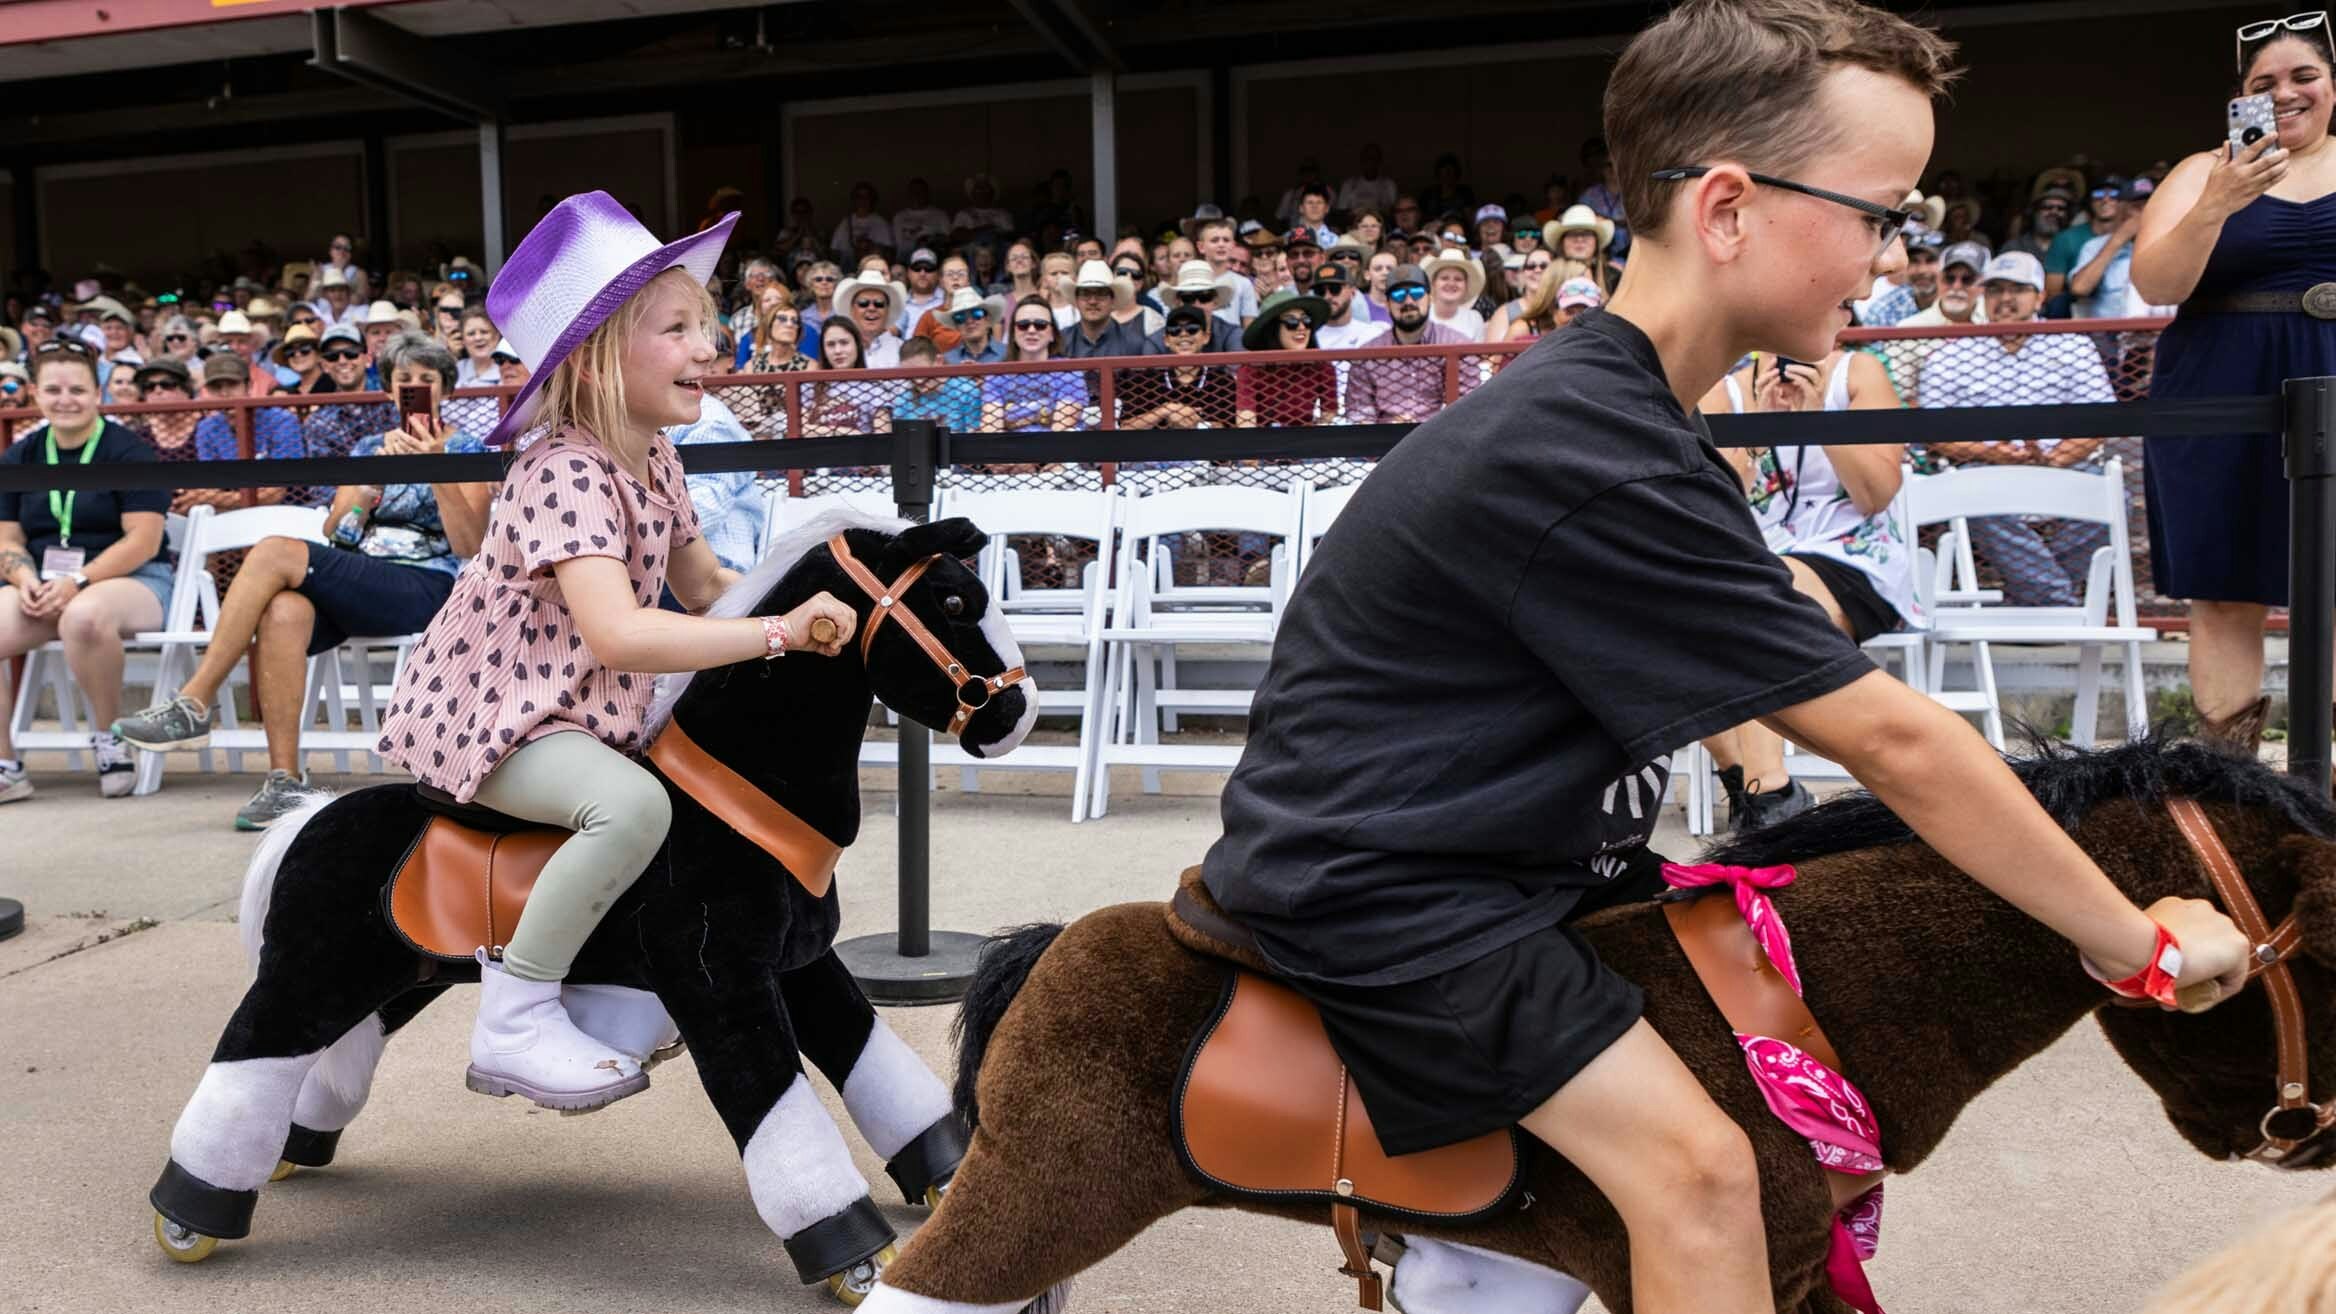 Ophelia Pugh on her black horse from Cheyenne tries to ride her horse into second place to pass up Rogen Hall on the Sorrel horse from Cheyenne during the final stretch of the Kids Horse Race at Cheyenne Frontier Days on July 24, 2023.